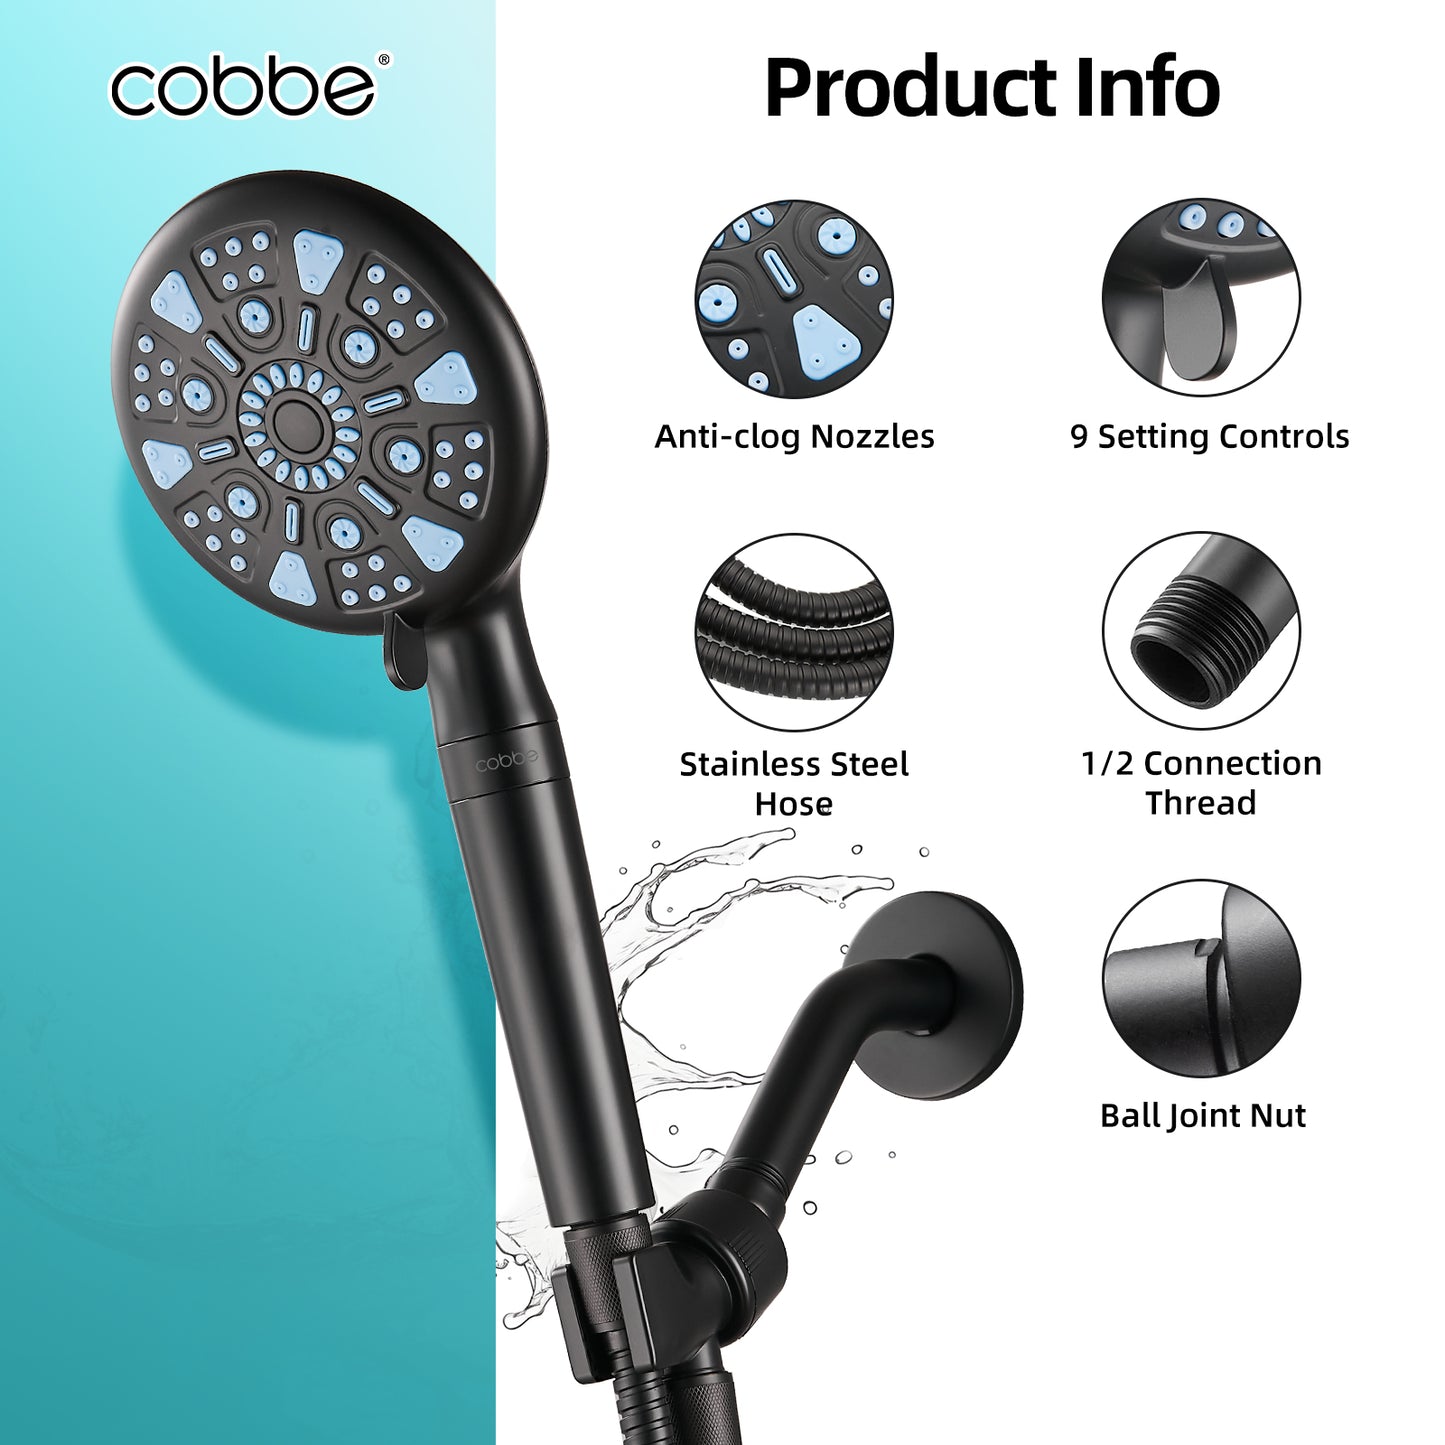 Cobbe Filtered Shower Head with Handheld, High Pressure 9 Spray Mode Shower Head with Filters, Built-in Power Spray to Clean Corner, Water Softener Filters Beads for Hard Water, Remove Chlorine